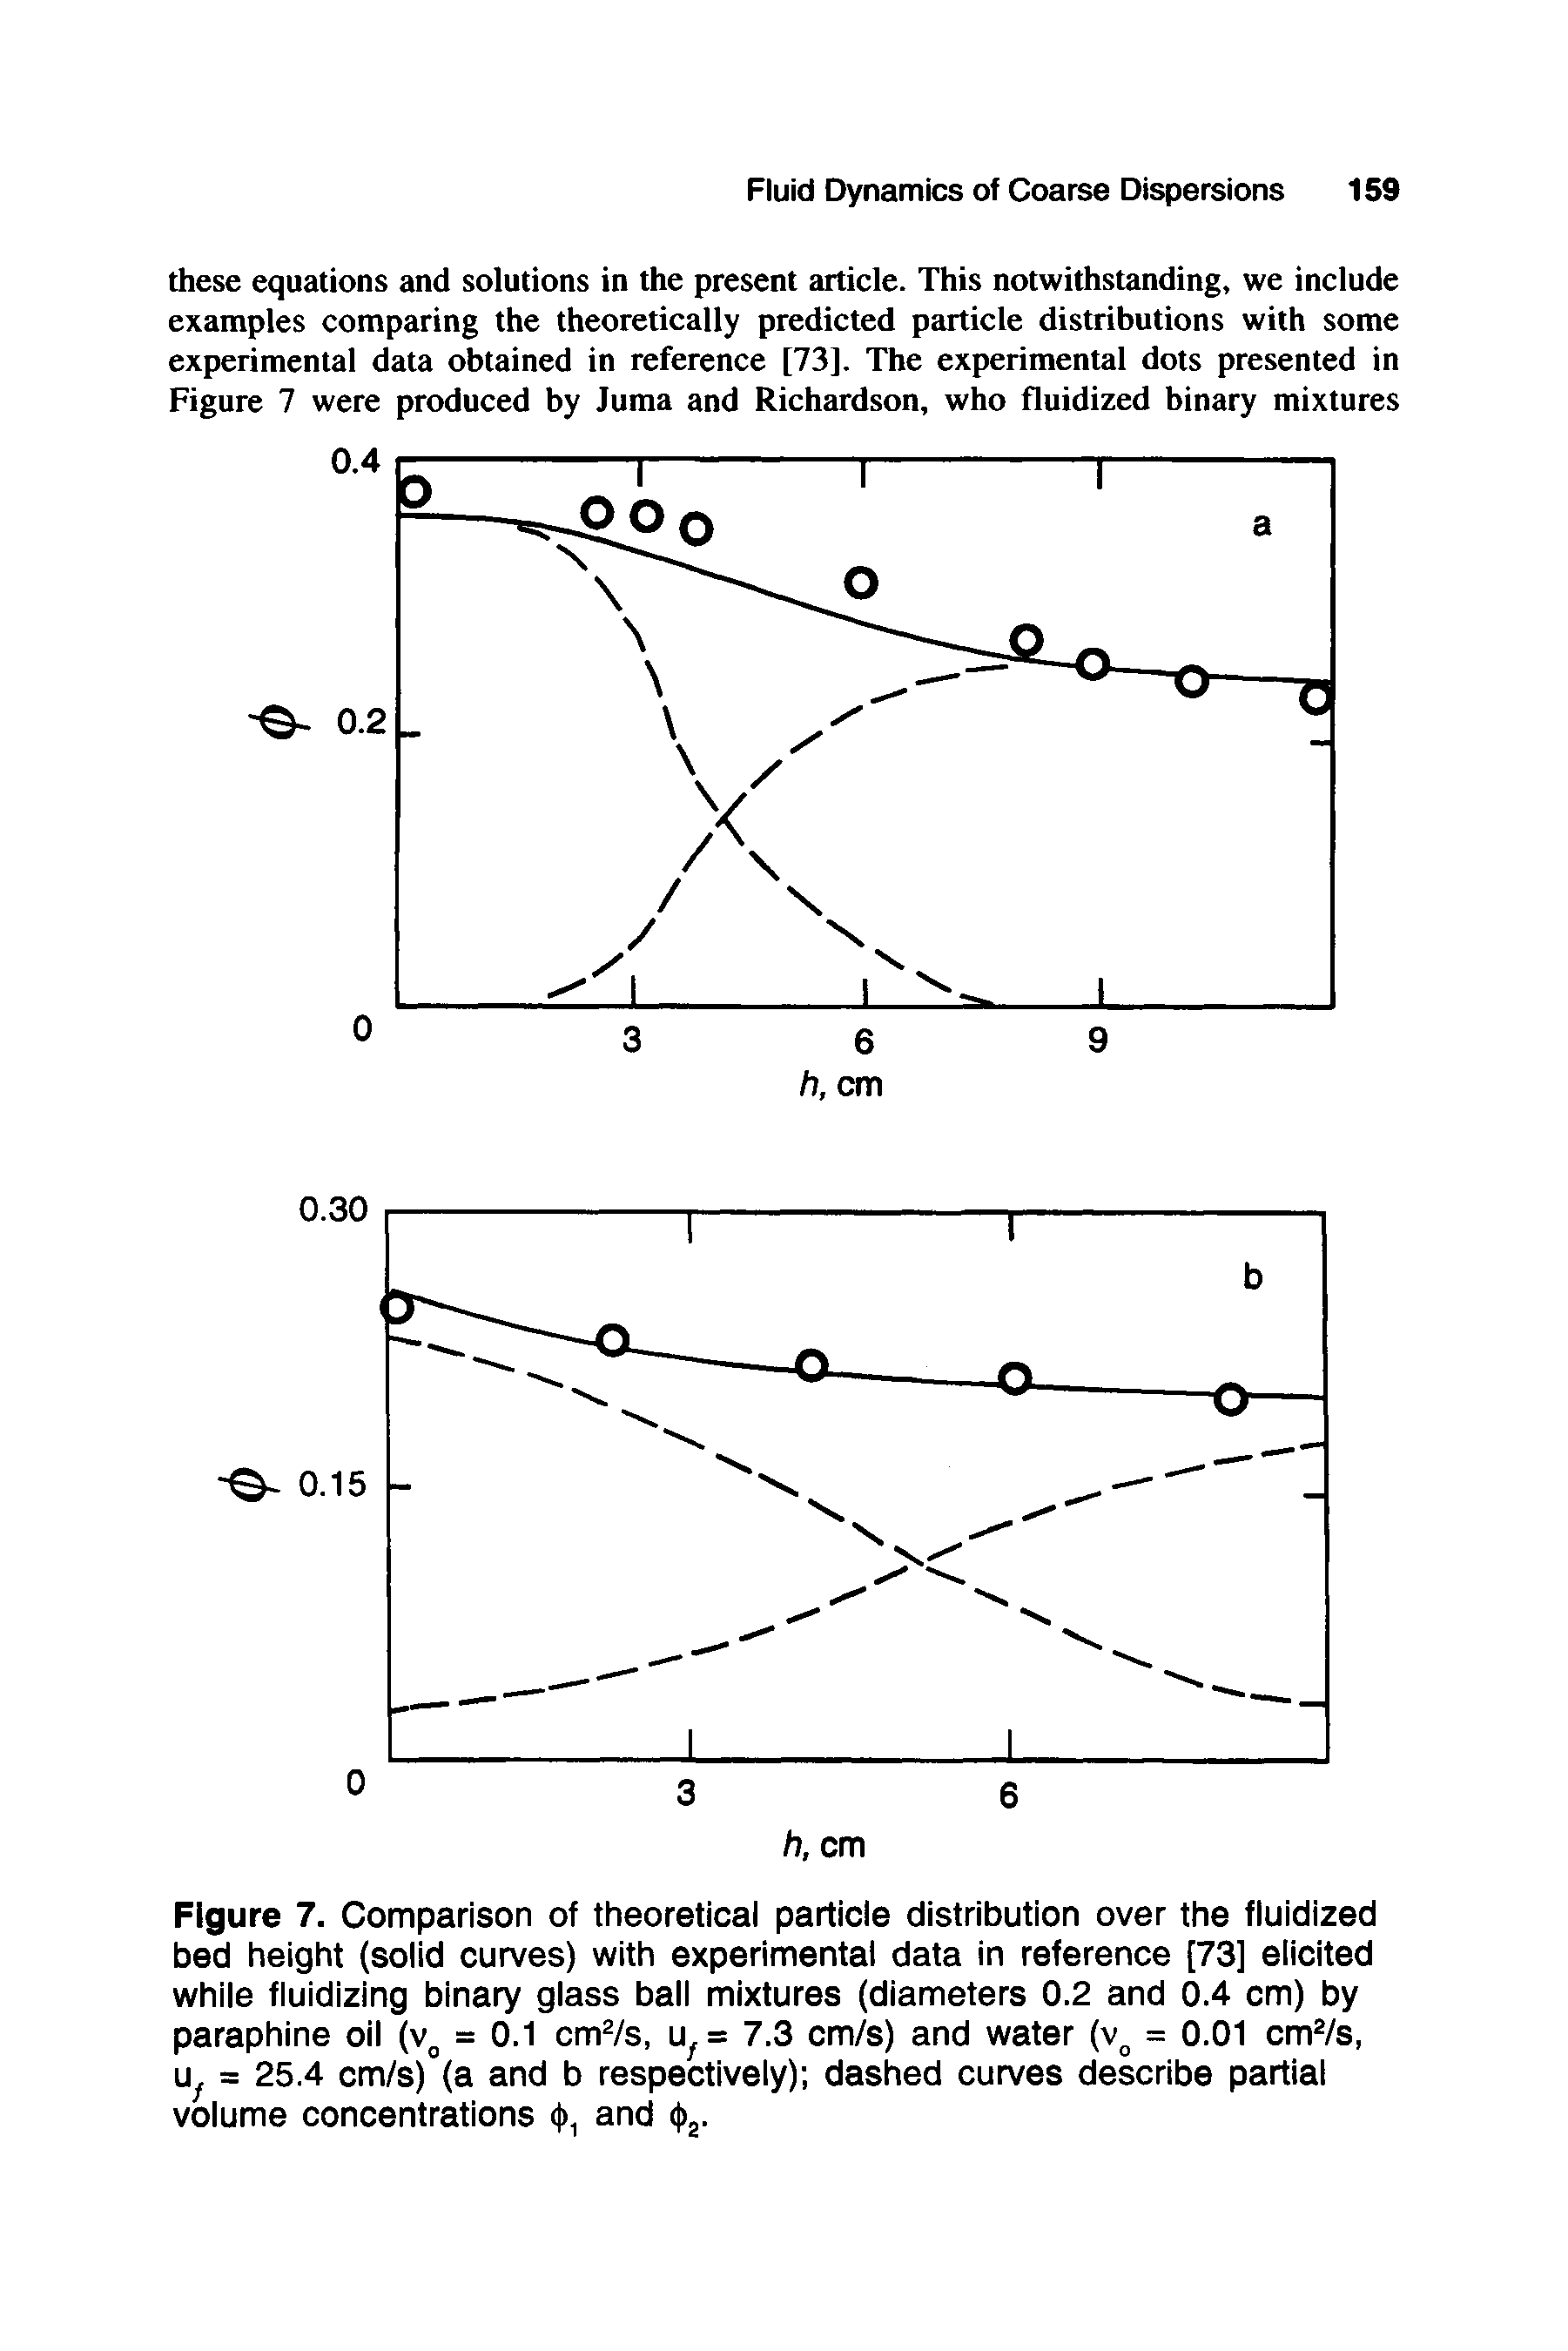 Figure 7. Comparison of theoretical particle distribution over the fluidized bed height (solid curves) with experimental data in reference [73] elicited while fluidizing binary glass ball mixtures (diameters 0.2 and 0.4 cm) by paraphine oil (v = 0.1 cmVs, u = 7.3 cm/s) and water (v = 0.01 cm /s, u = 25.4 cm/s) (a and b respectively) dashed curves describe partial volume concentrations ( ), and ( )j.